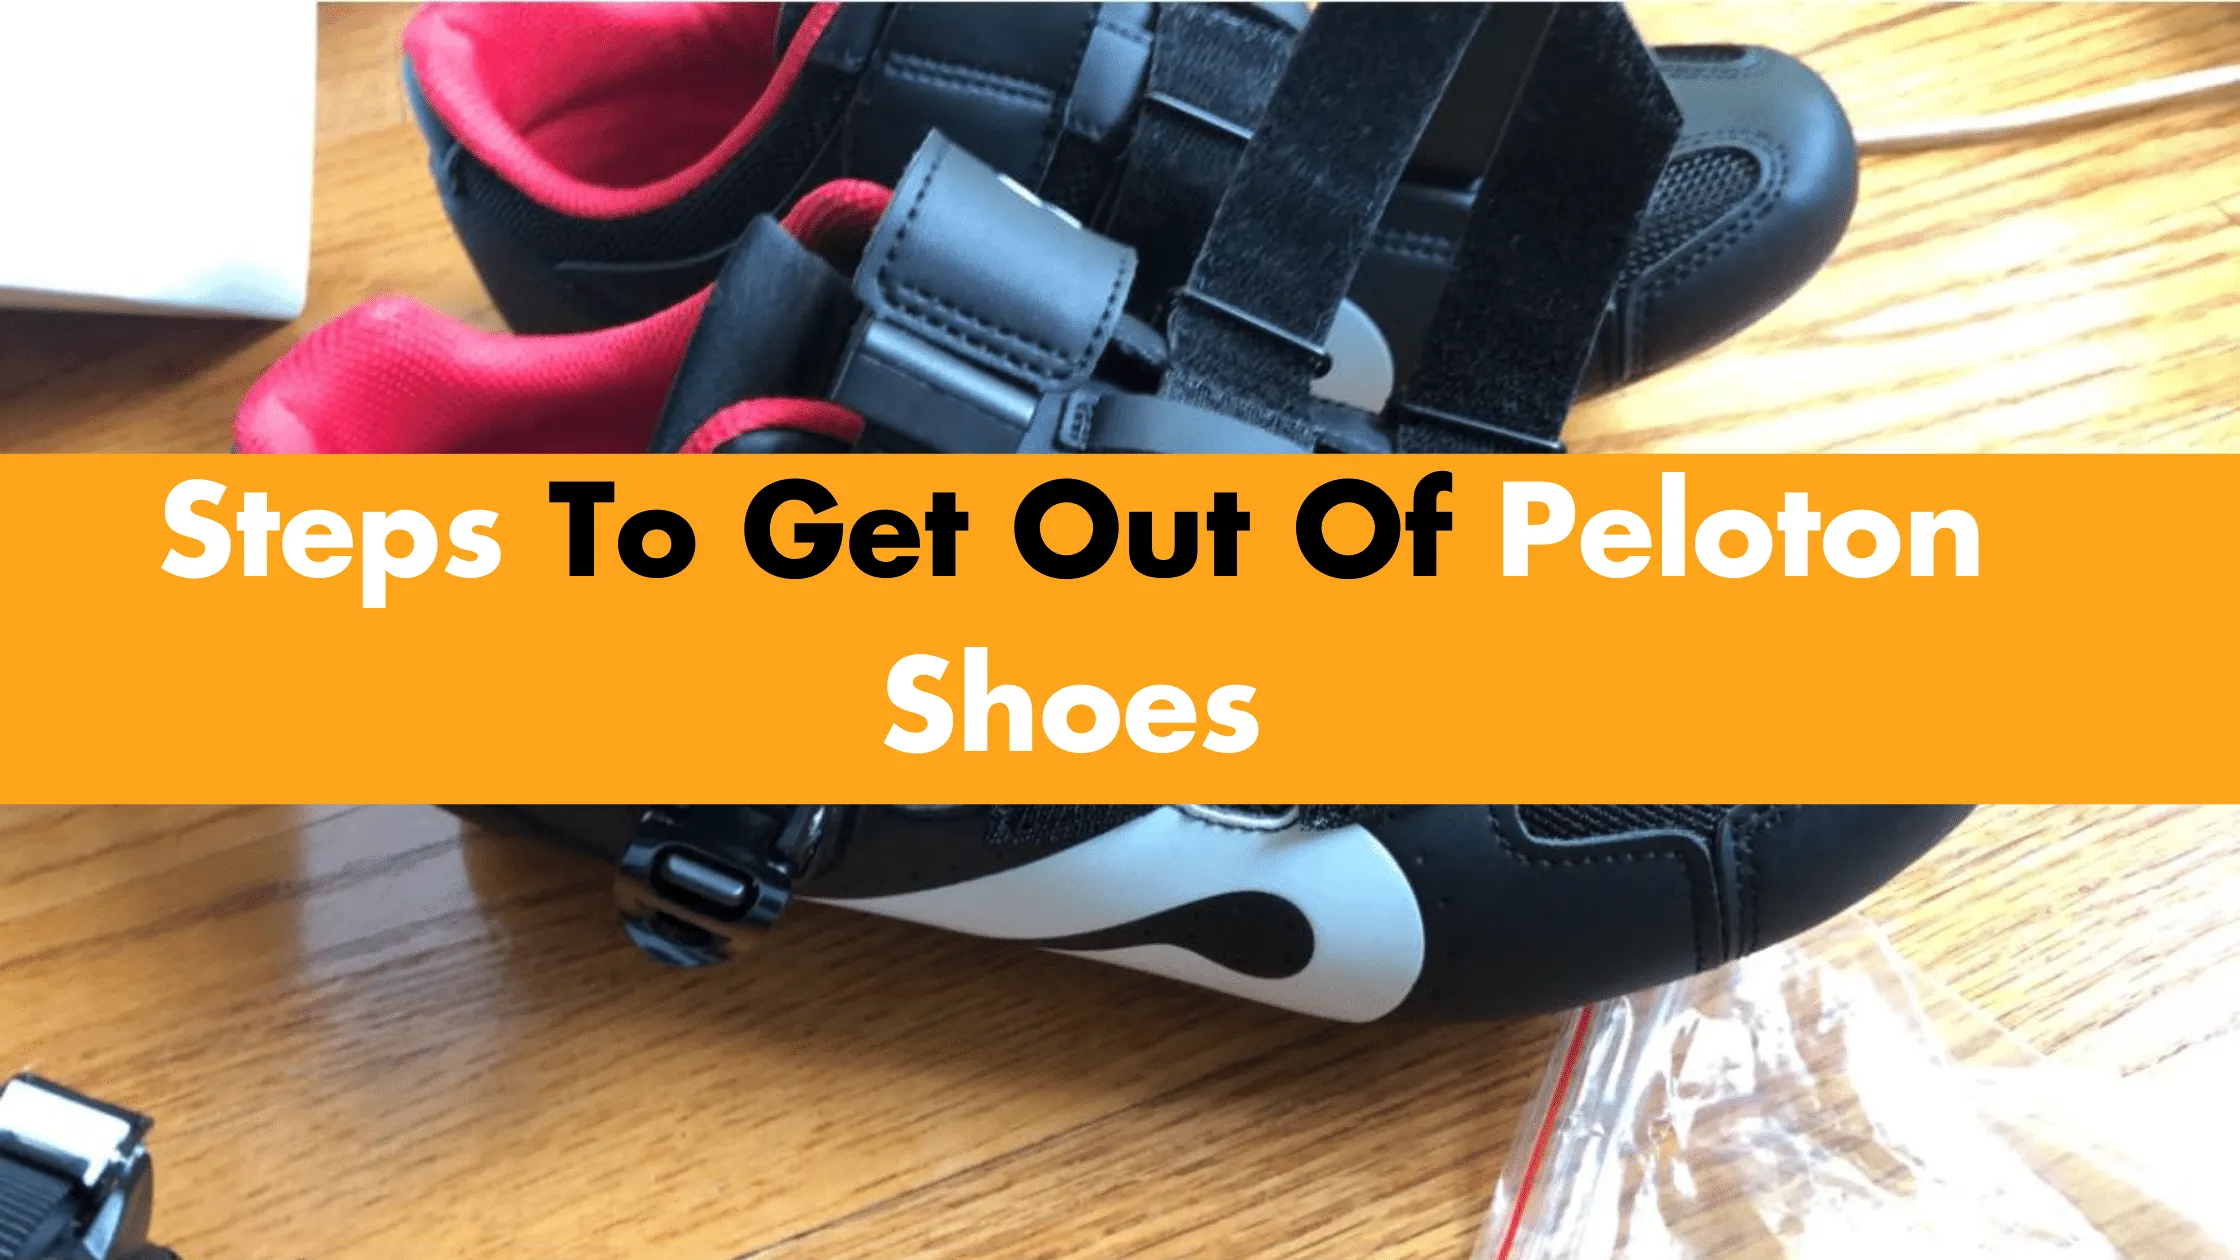 Steps To Get Out Of Peloton Shoes